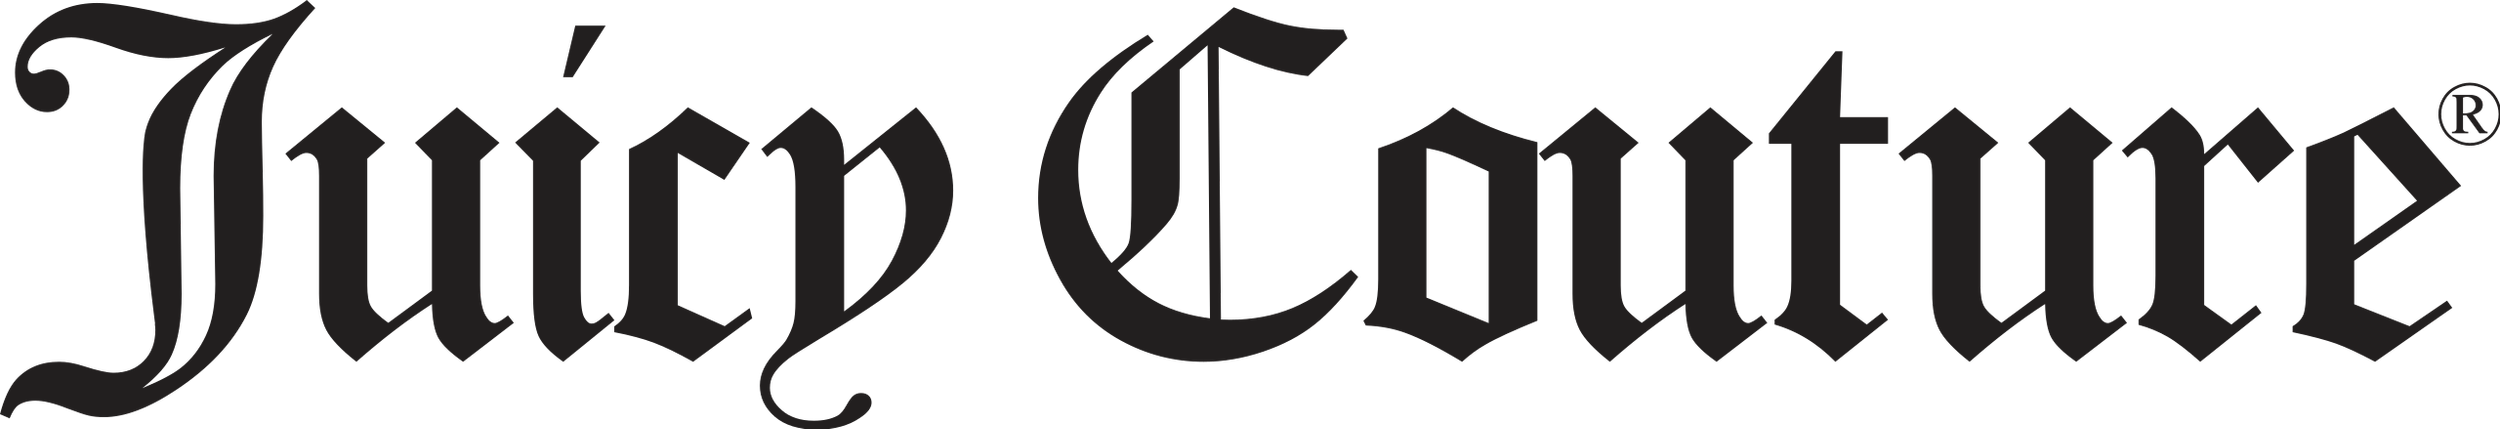 Juicy_Couture_logo.svg.png